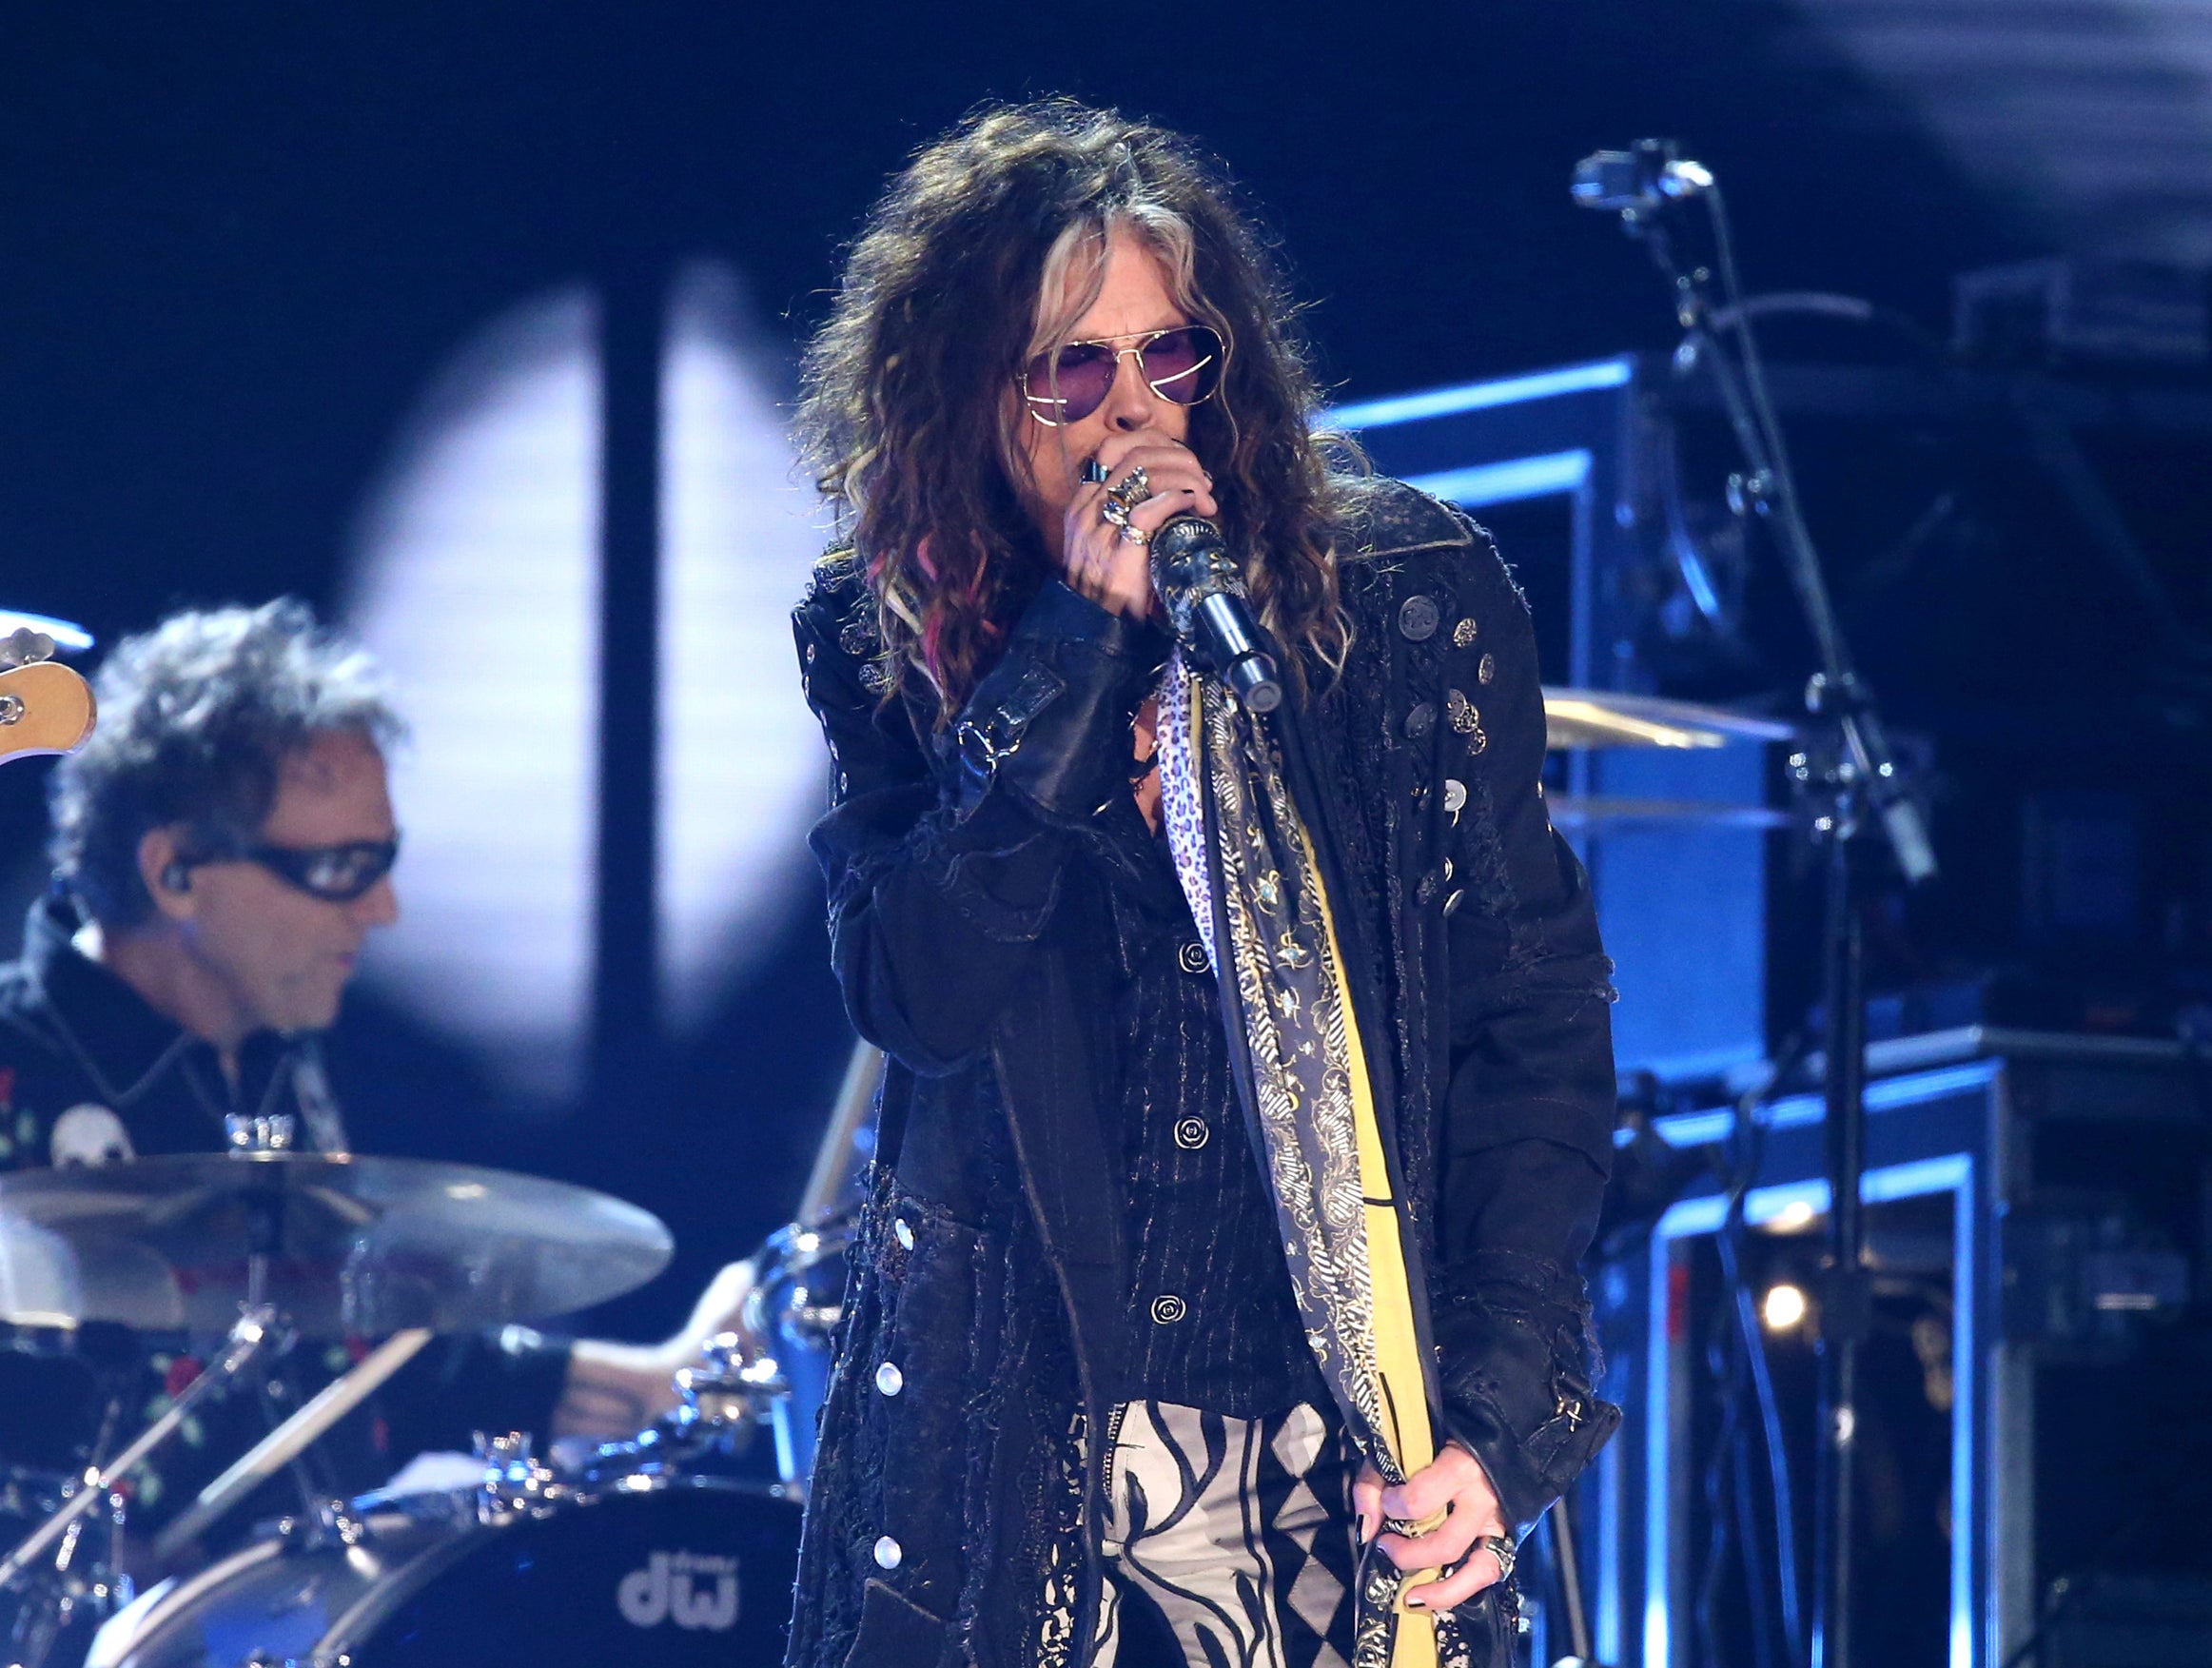 Steven Tyler enters treatment, Aerosmith cancels shows | The Independent